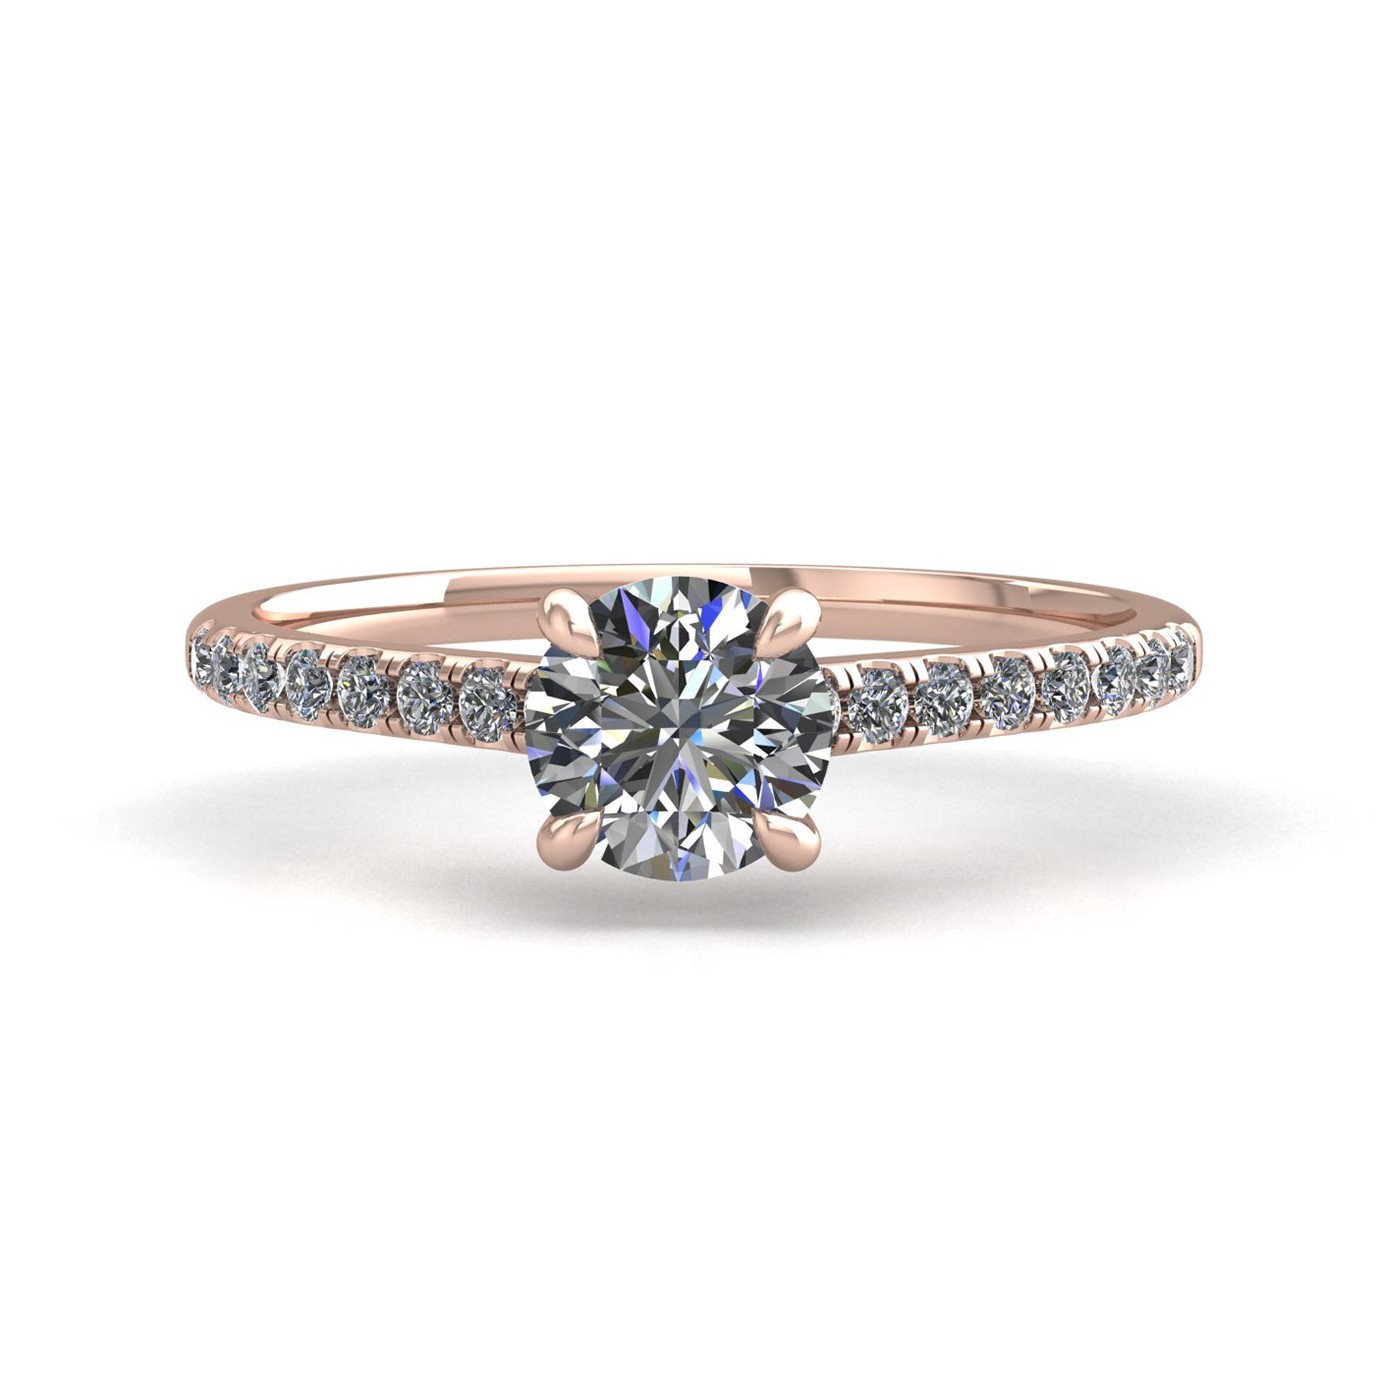 18k rose gold 0,80 ct 4 prongs round cut diamond engagement ring with whisper thin pavÉ set band Photos & images